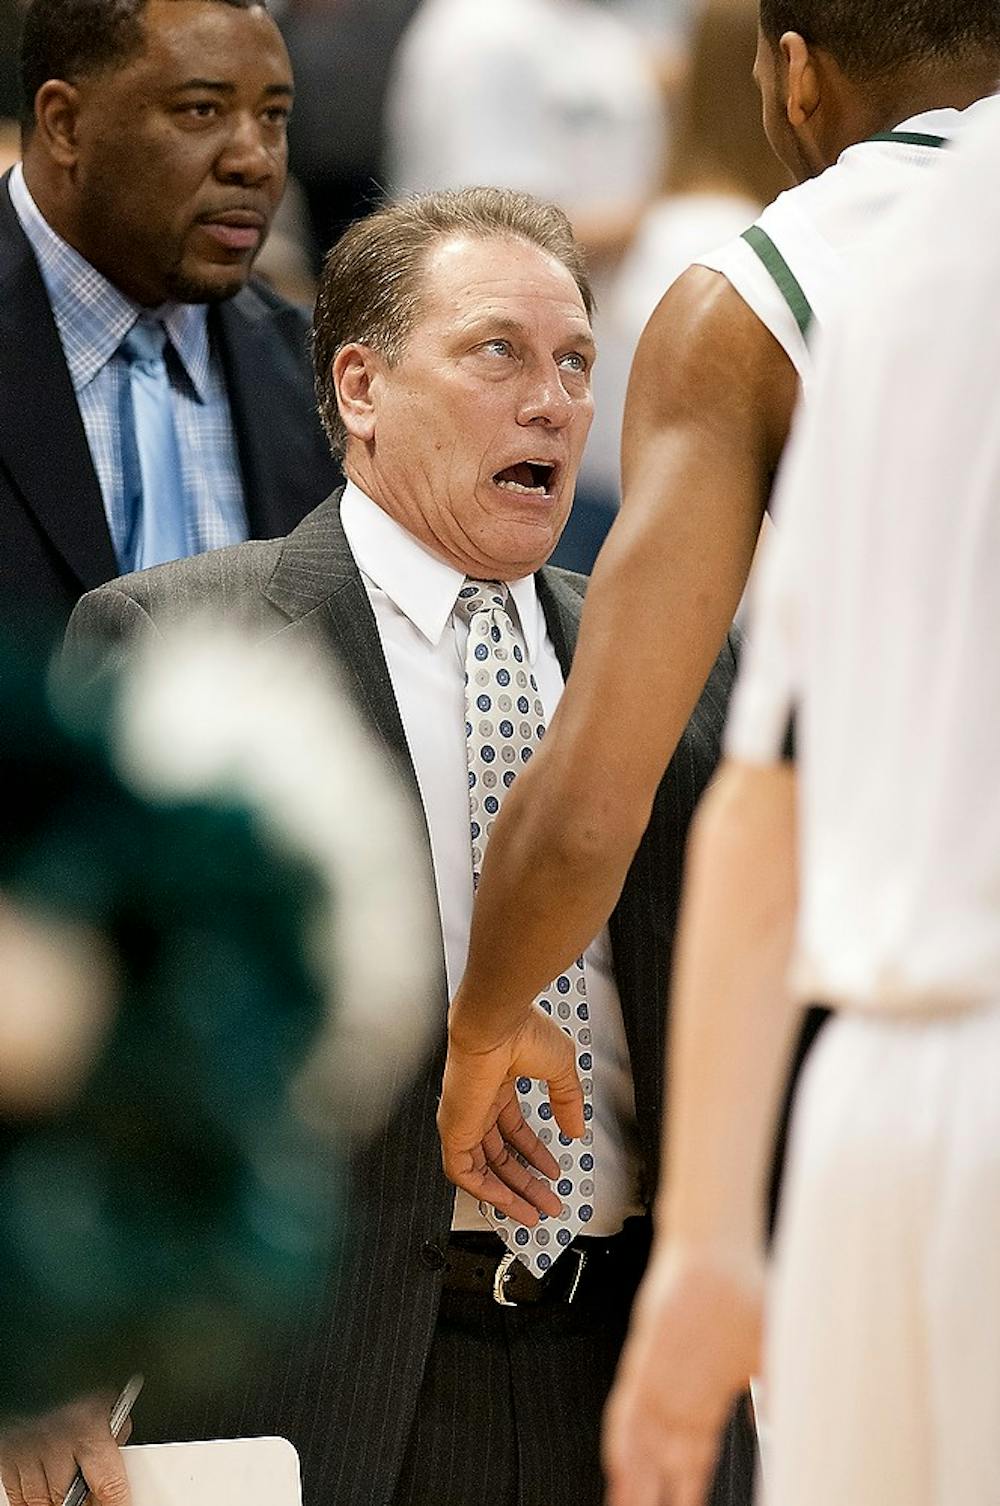 	<p>Men&#8217;s basketball head coach Tom Izzo has a discussion on the sidelines with several members of the <span class="caps">MSU</span> team during the basketball game against Arkansas-Pine Bluff on Wednesday, Dec. 5, 2012, at Breslin Center. The Spartans defeated Arkansas-Pine Bluff 76-44 and are due to play again on Saturday, Dec. 8, 2012, against Chicago Loyola. Danyelle Morrow/The State News</p>